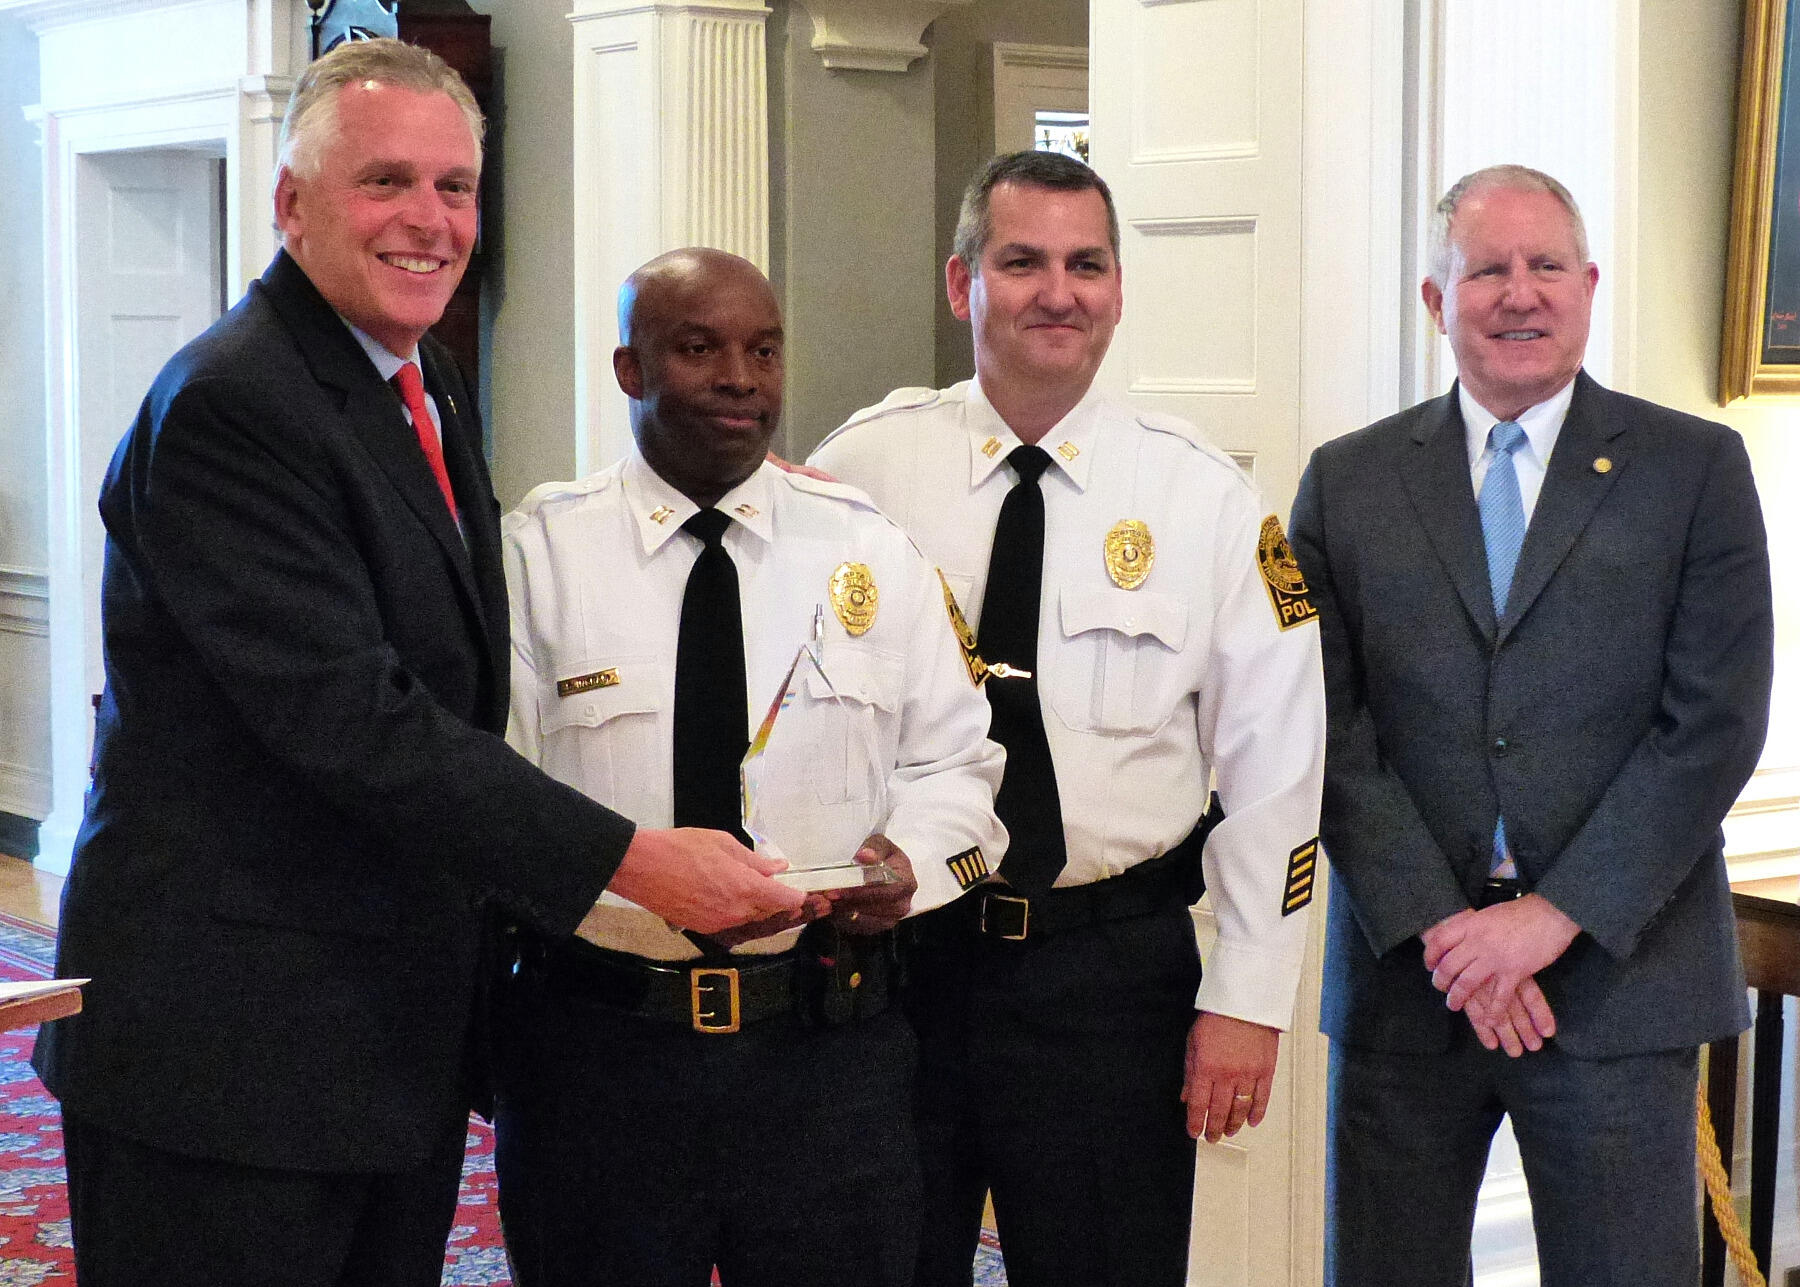  From left: Gov. Terry McAuliffe, VCU Police Capt. Sean Ingram, VCU Police Capt. Howard “Mike” O’Berry and Commissioner Richard Holcomb, Virginia Department of Motor Vehicles.